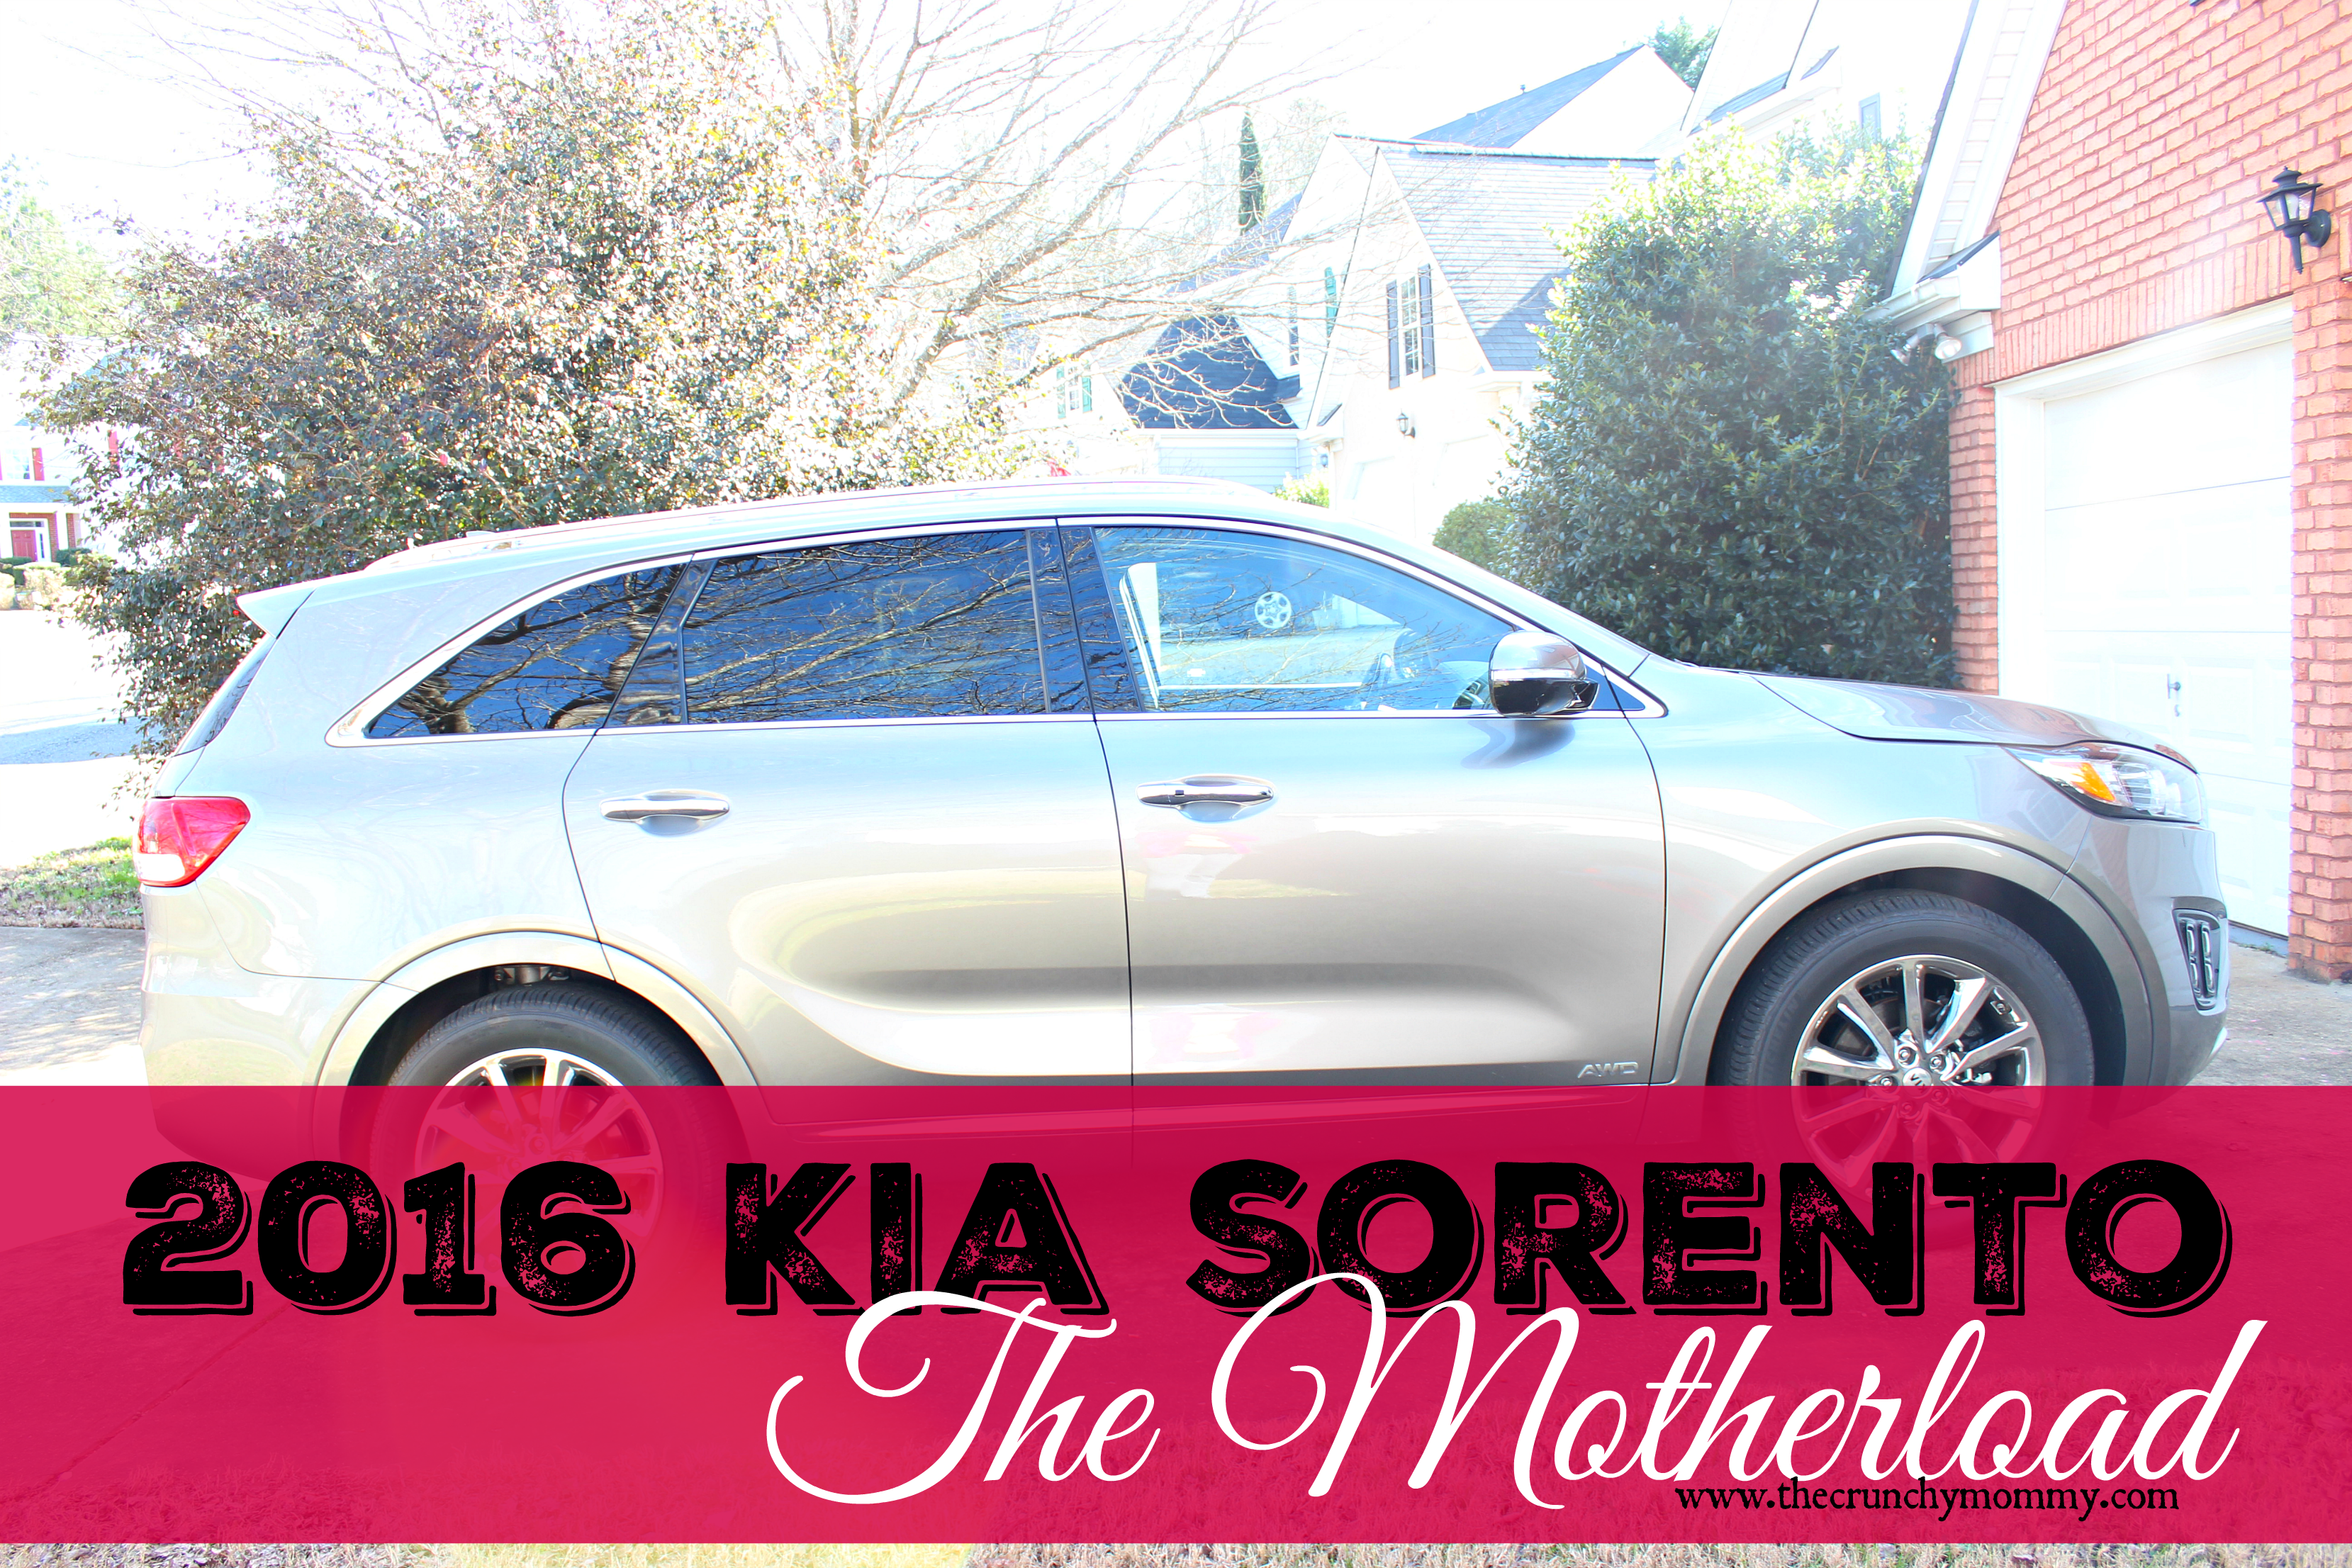 The 2016 Kia Sorento is the "mother" of all vehicles I've ever driven. Check out my review at www.aaronicabcole.com and see all the features that make motherhood way easier!